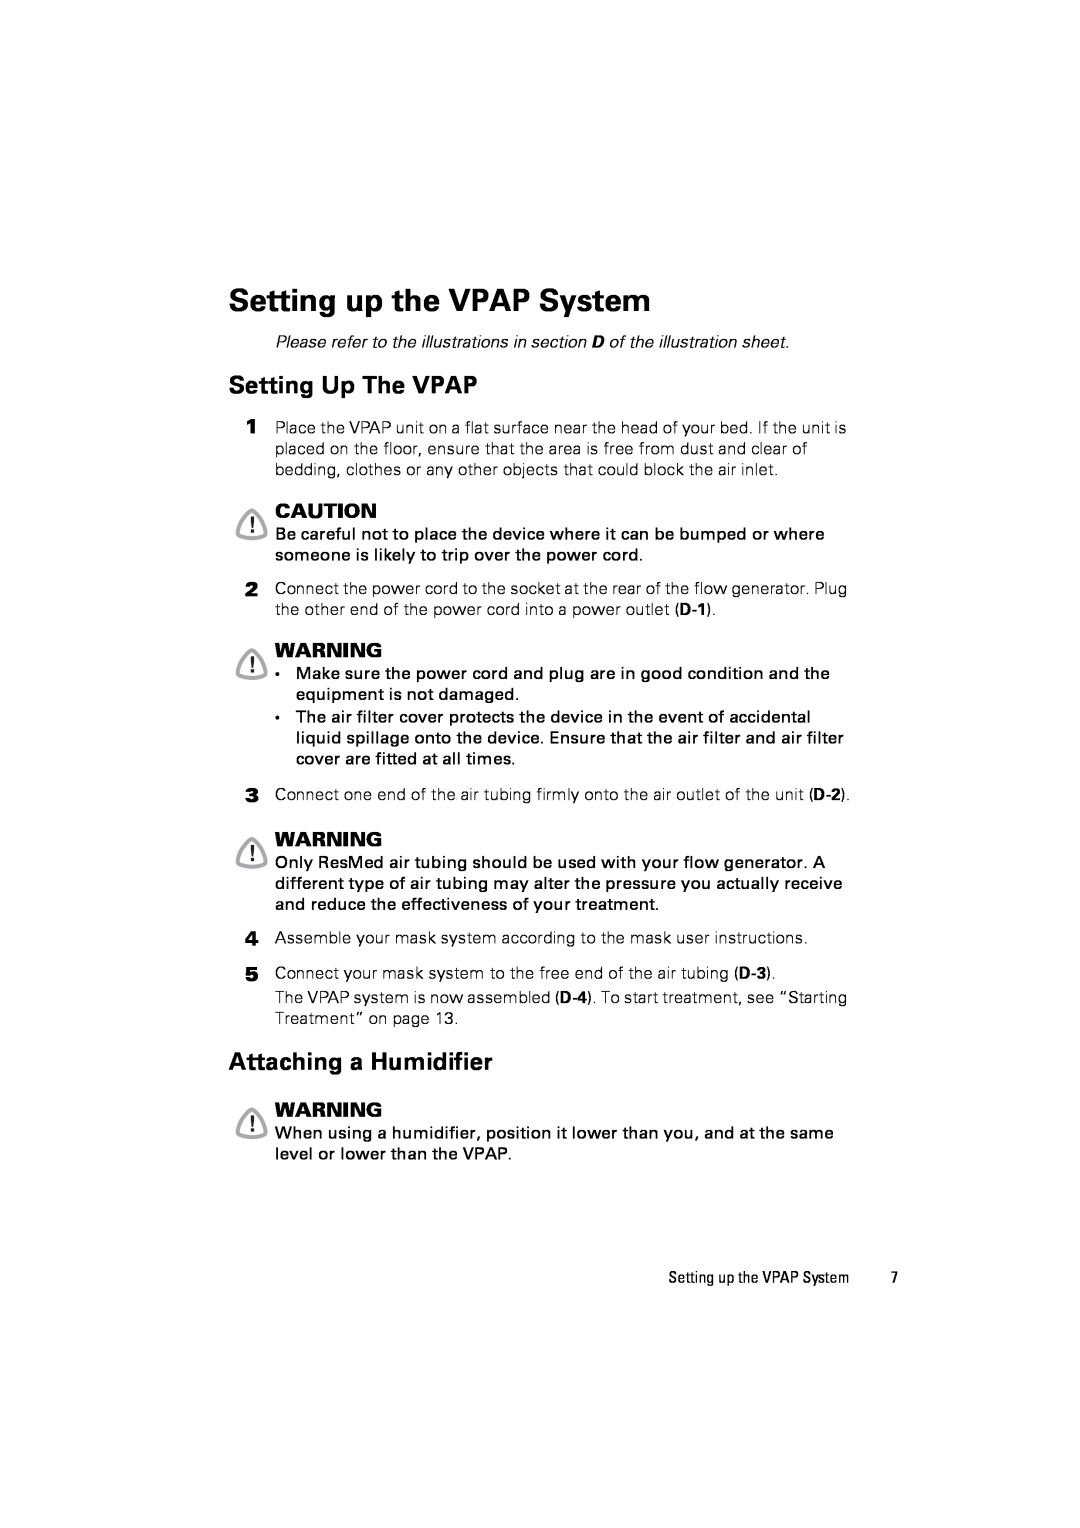 ResMed III user manual Setting up the VPAP System, Setting Up The VPAP, Attaching a Humidifier 